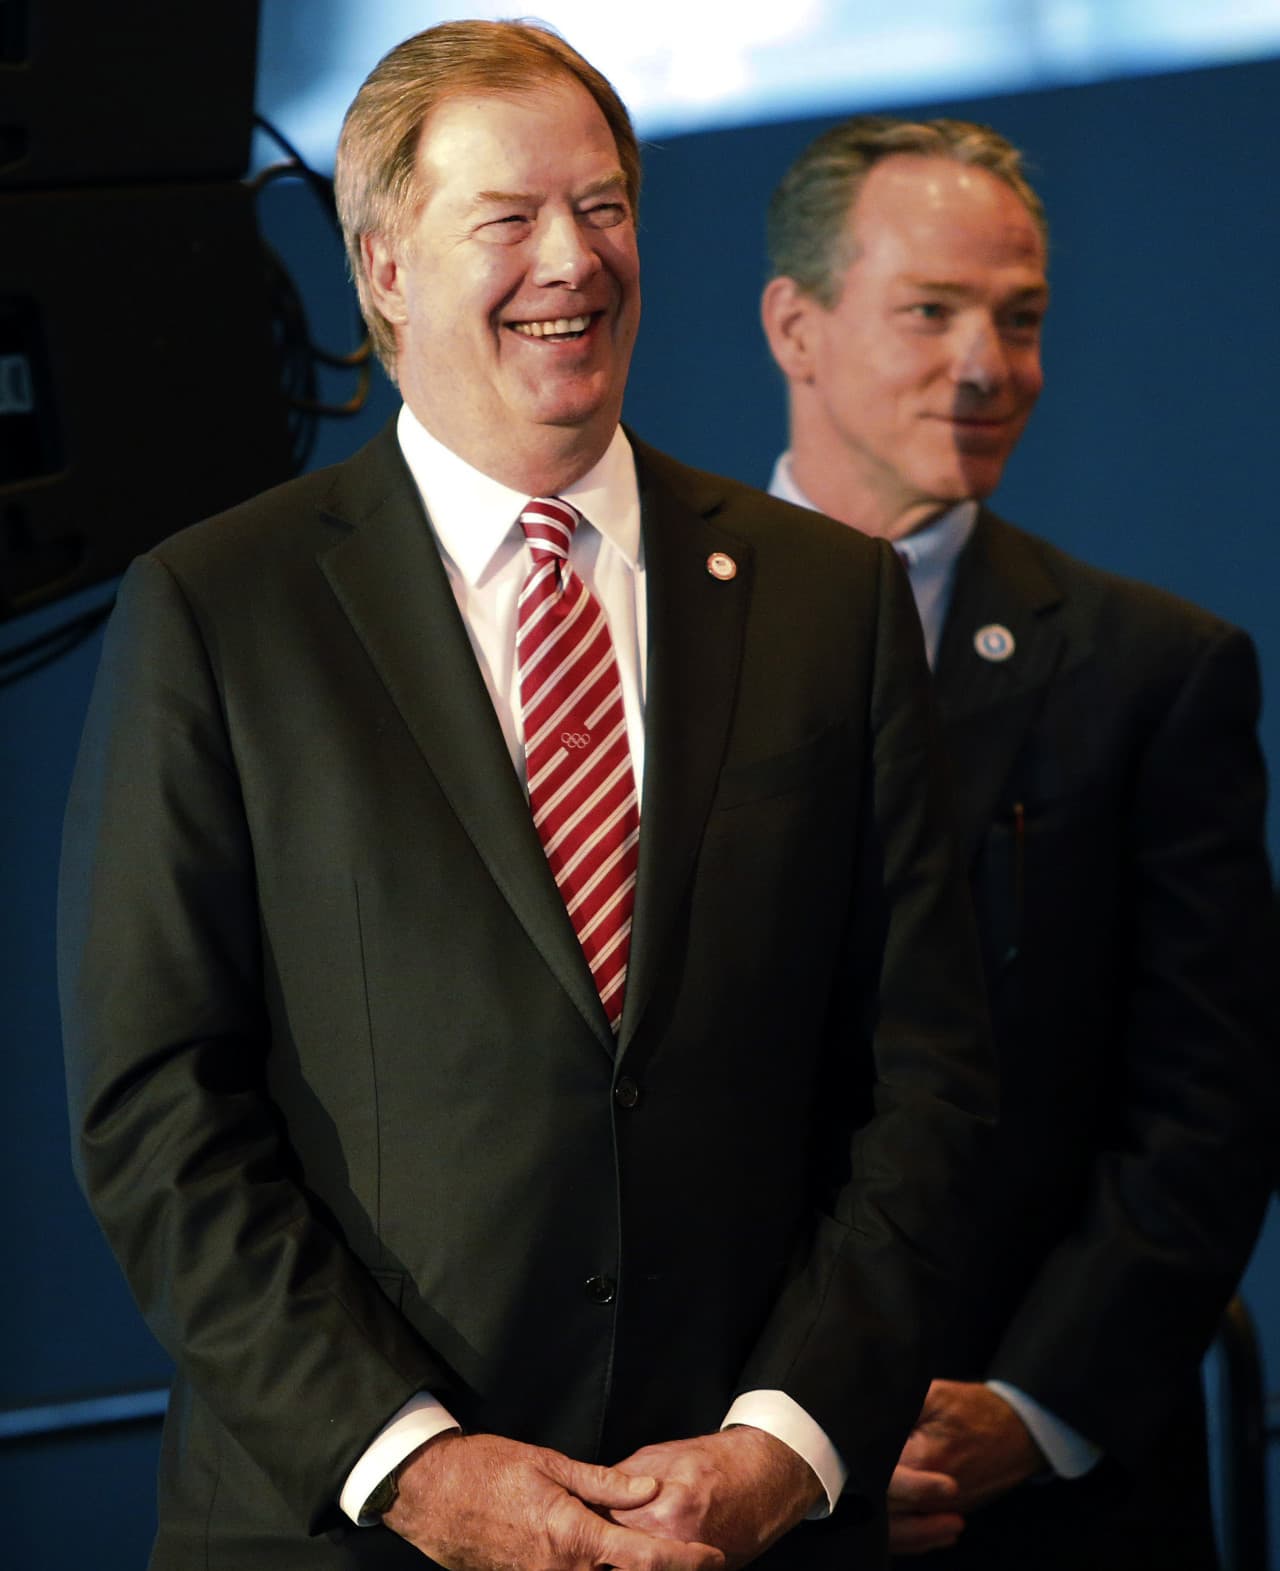 USOC Chairman of the Board Larry Probst, left, and John Fish, Boston's bid chairman and head of the local Suffolk Construction firm, smile during the news conference. (Winslow Townson/AP)